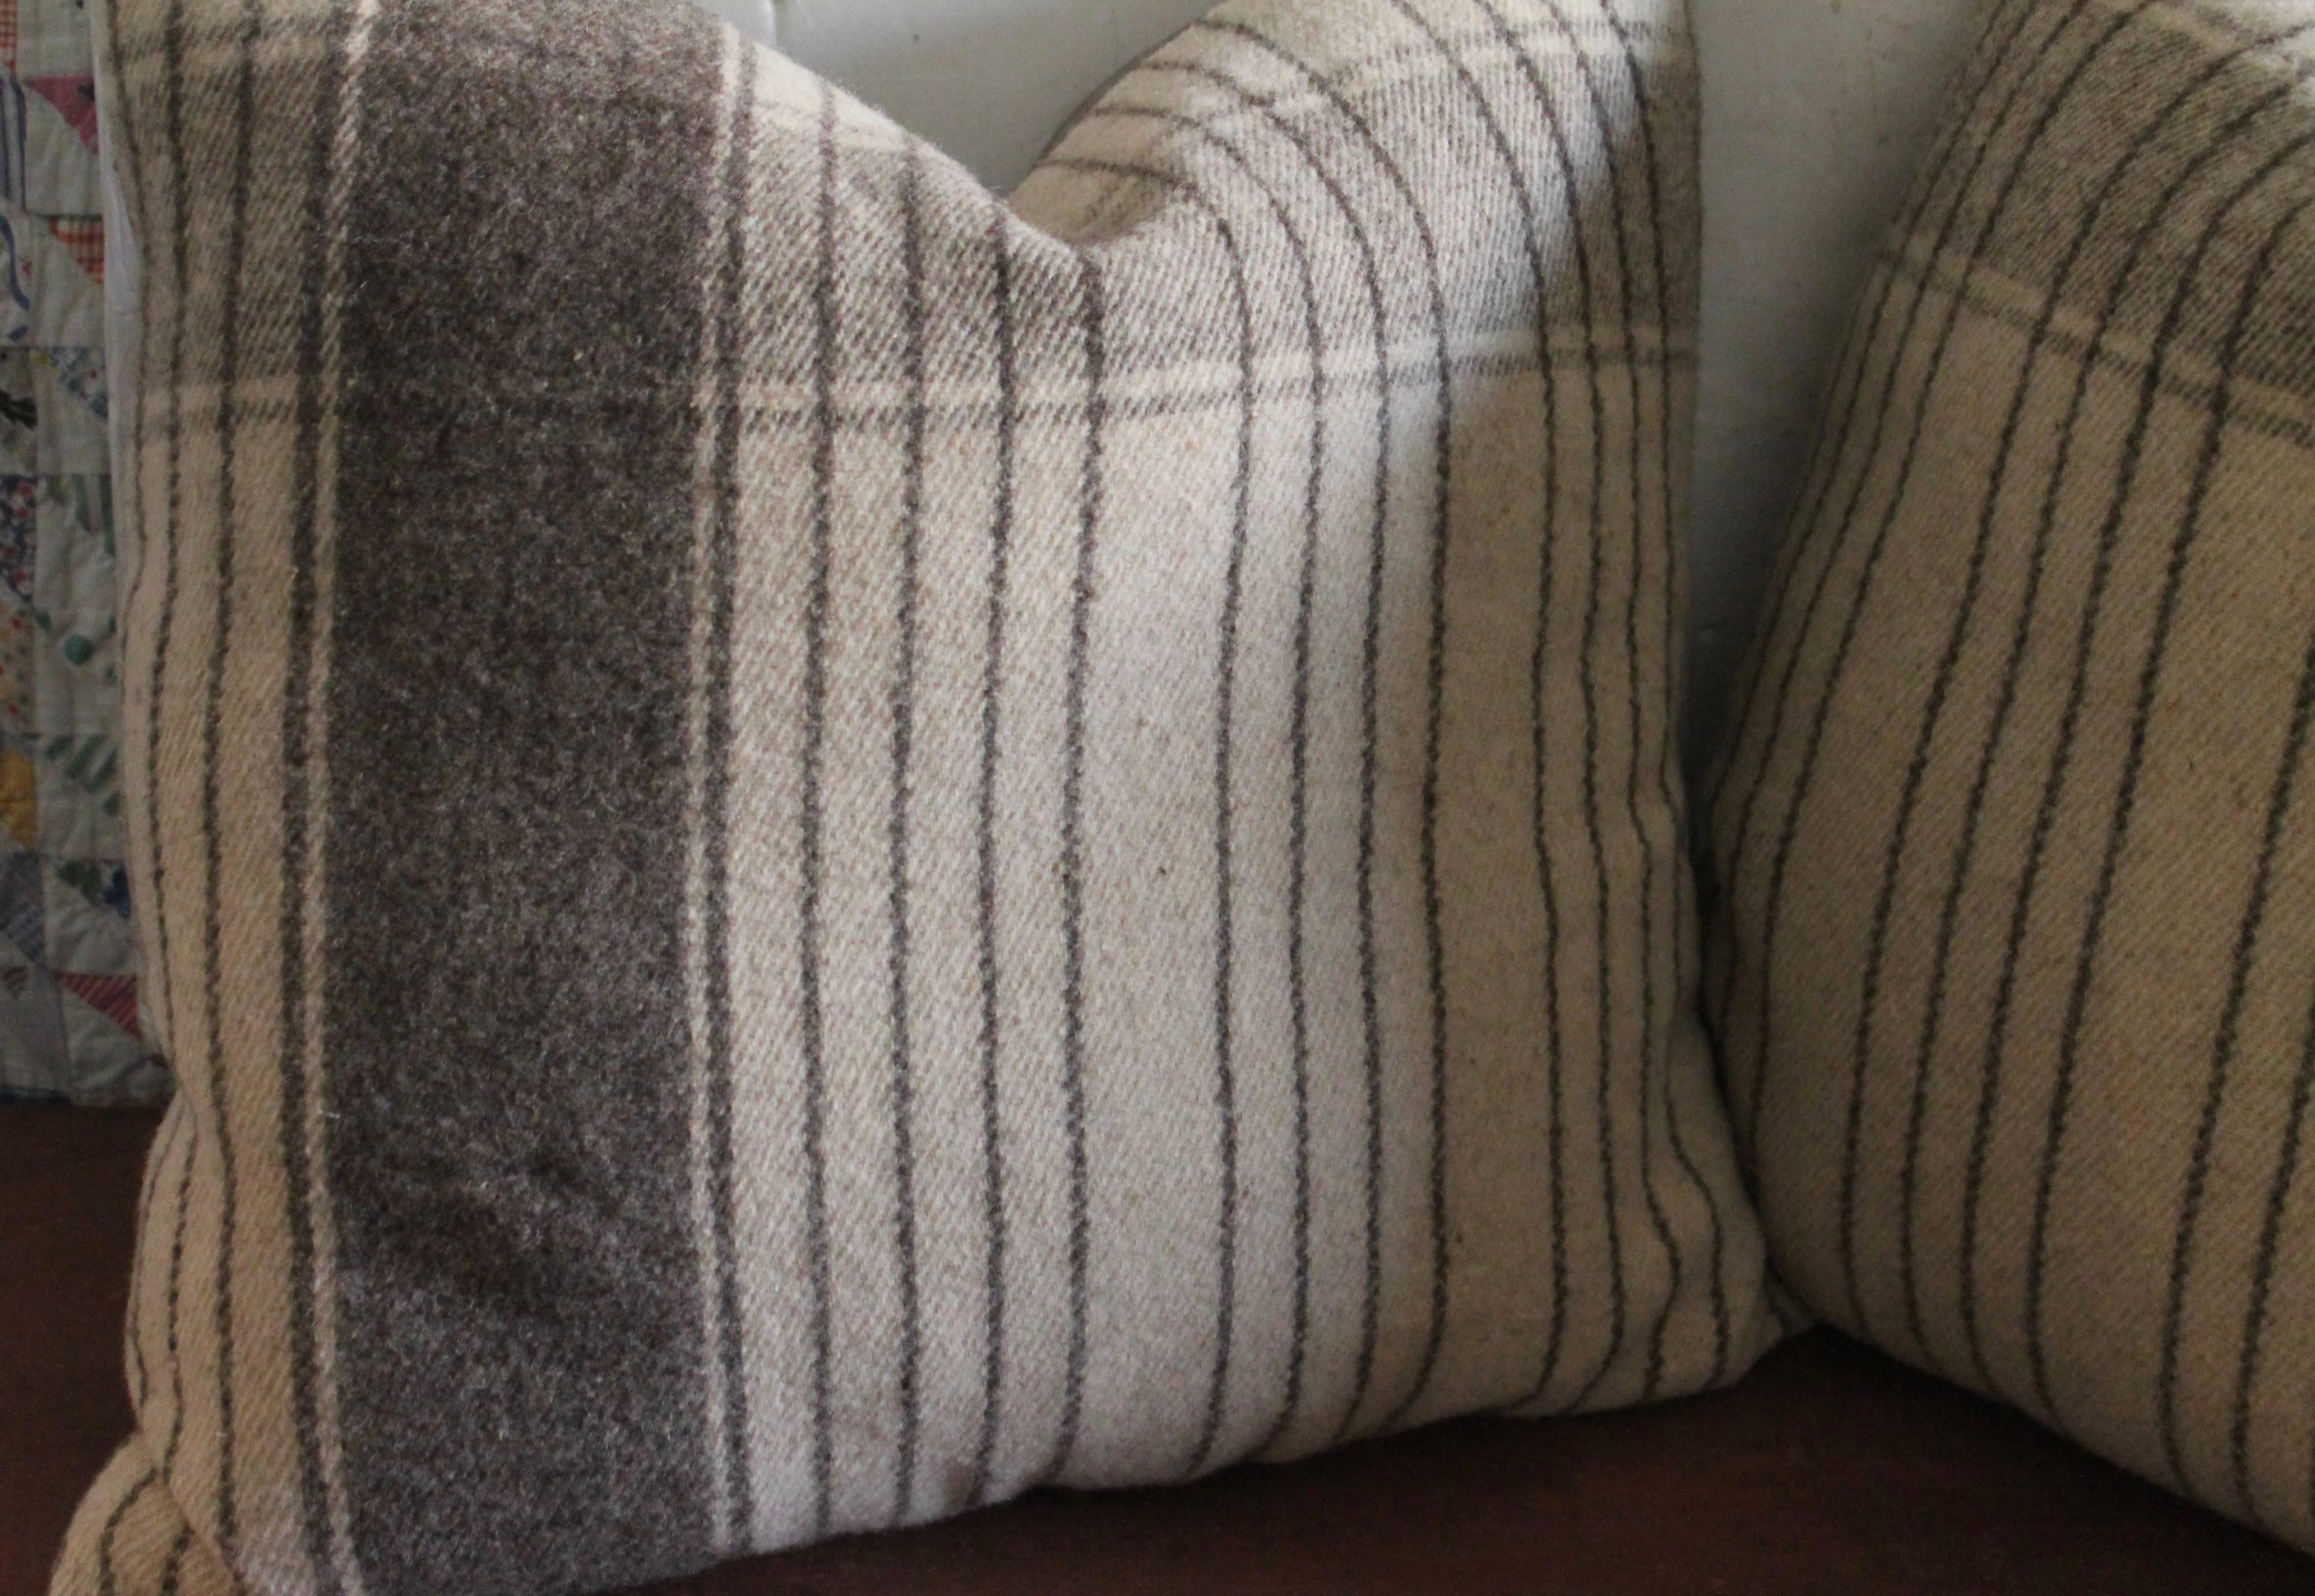 These soft woolen weaving pillows are in fine condition and have a matching grey cotton linen backing.